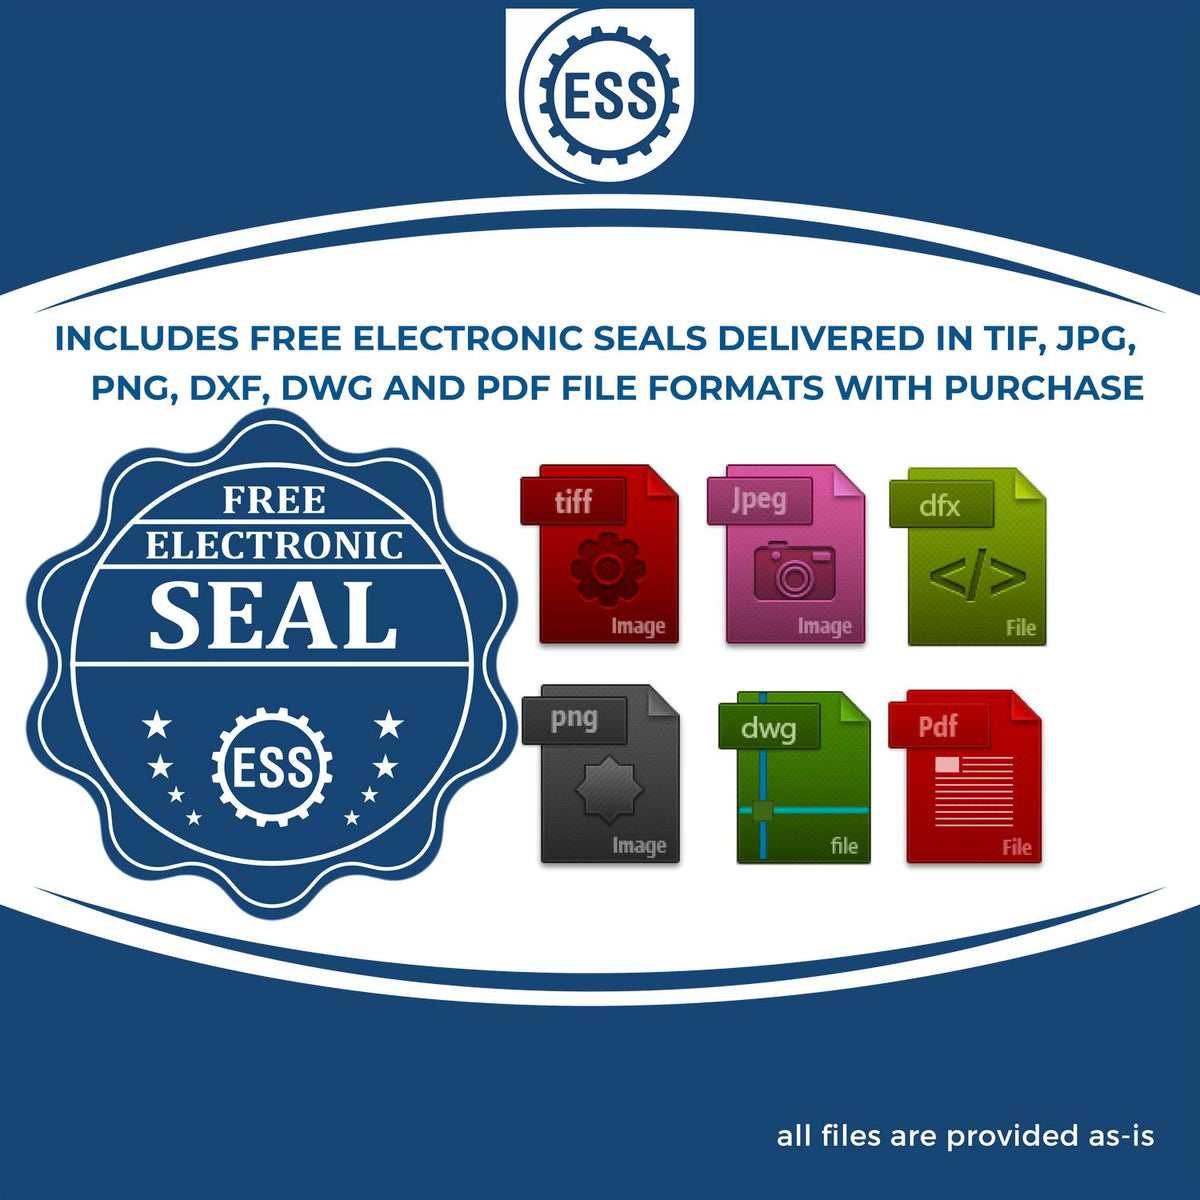 An infographic for the free electronic seal for the Self-Inking Maine PE Stamp illustrating the different file type icons such as DXF, DWG, TIF, JPG and PNG.